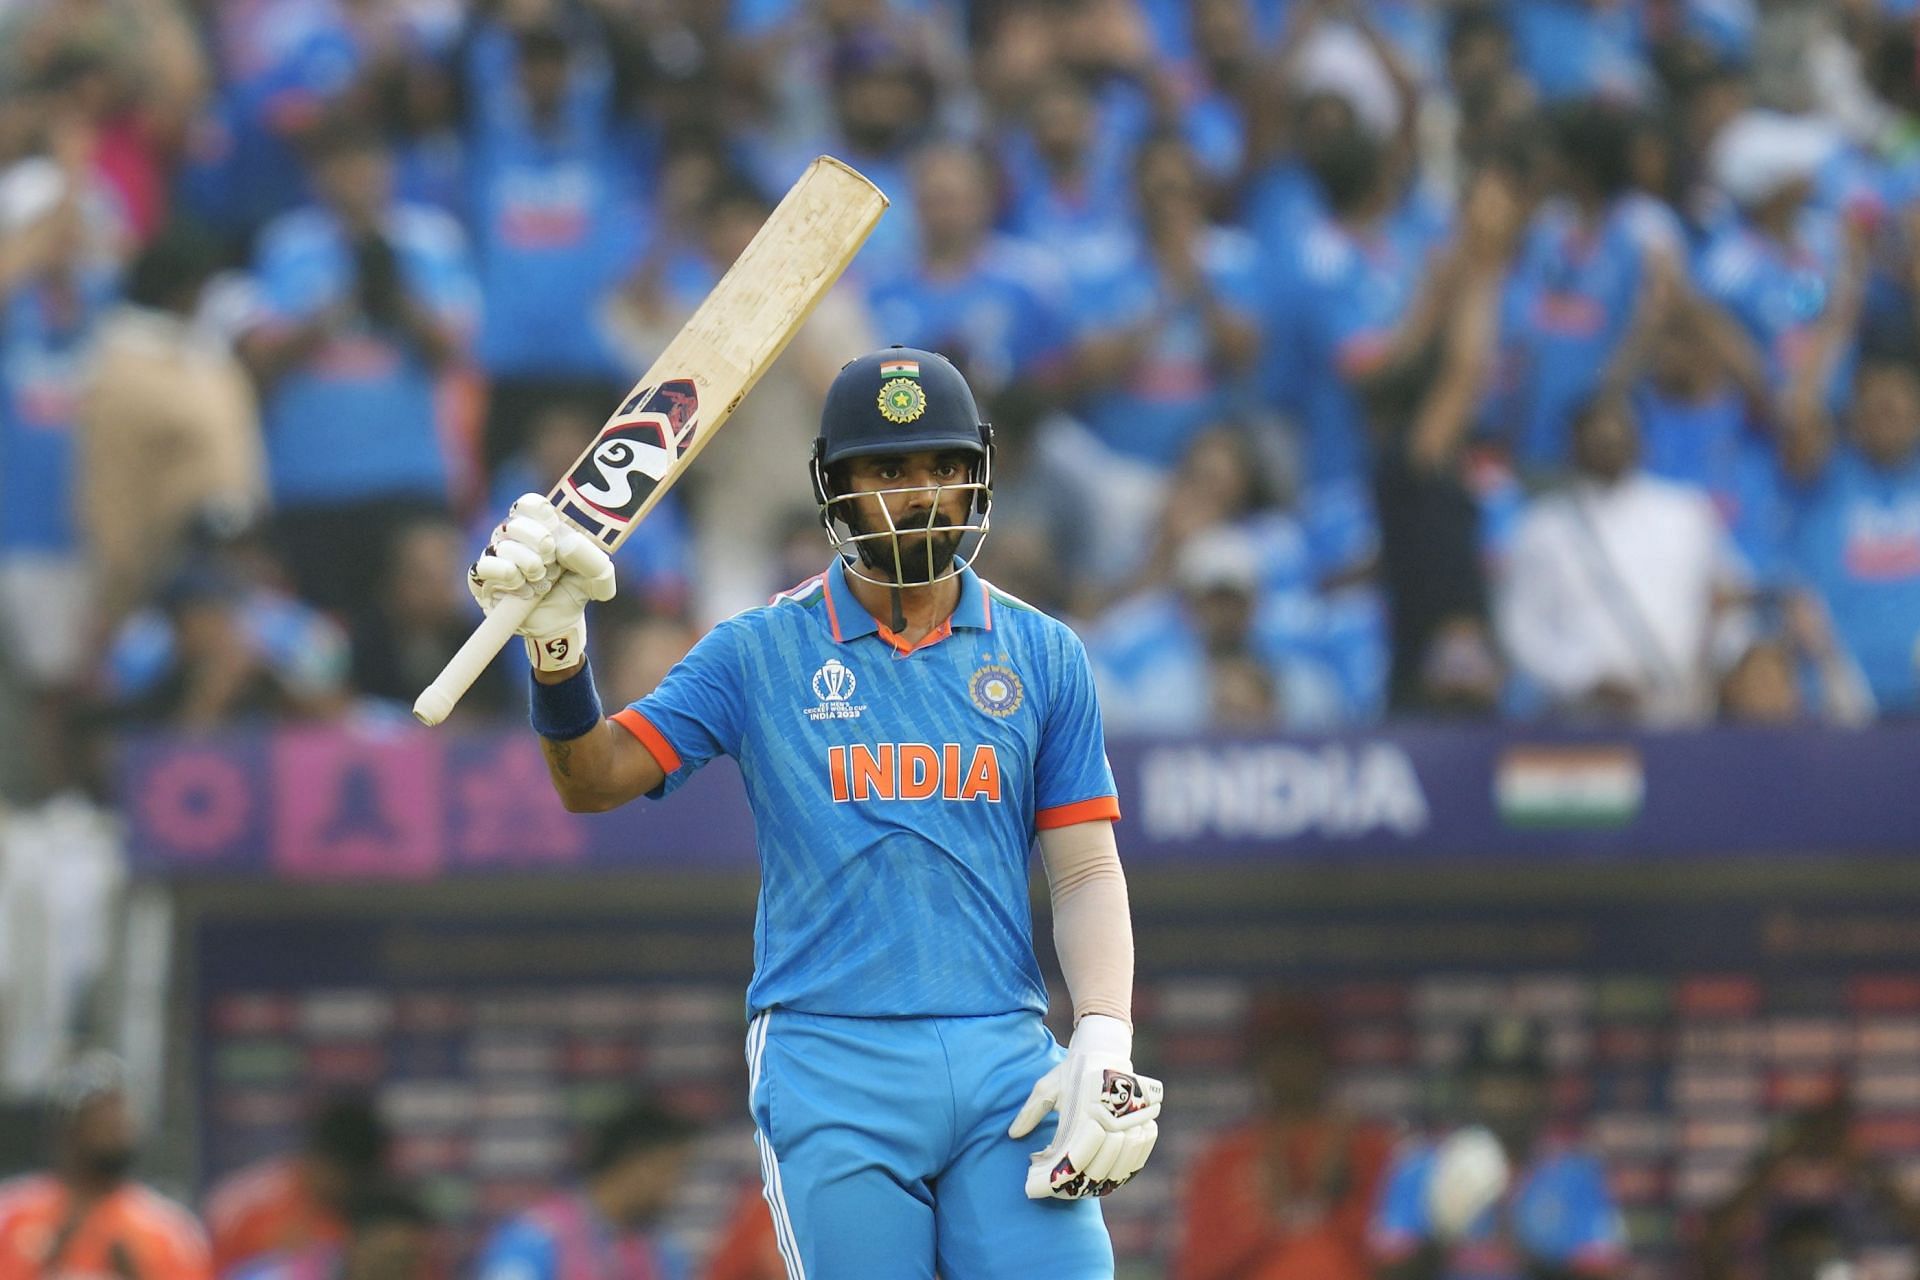 India have arguably the best No. 5 in the world in KL Rahul